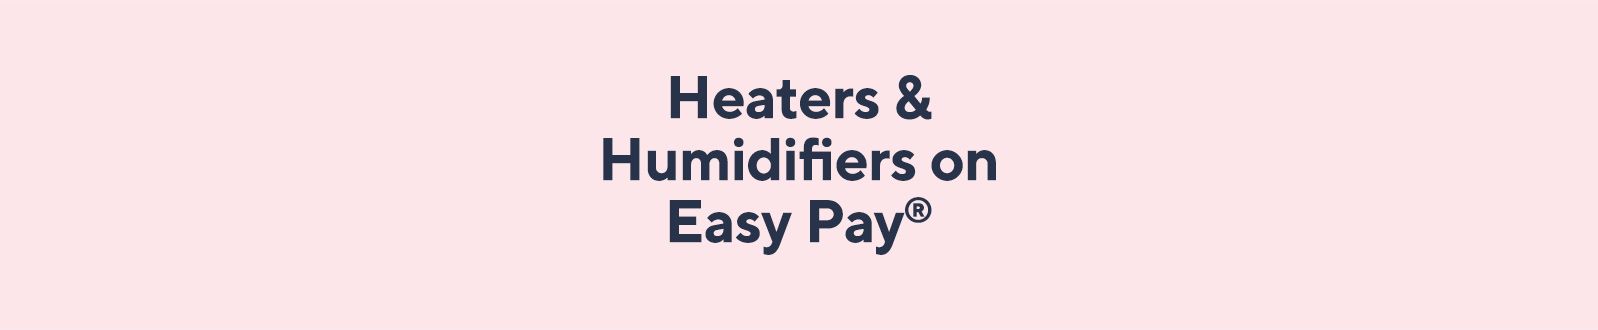 Heaters & Humidifiers on Easy Pay®